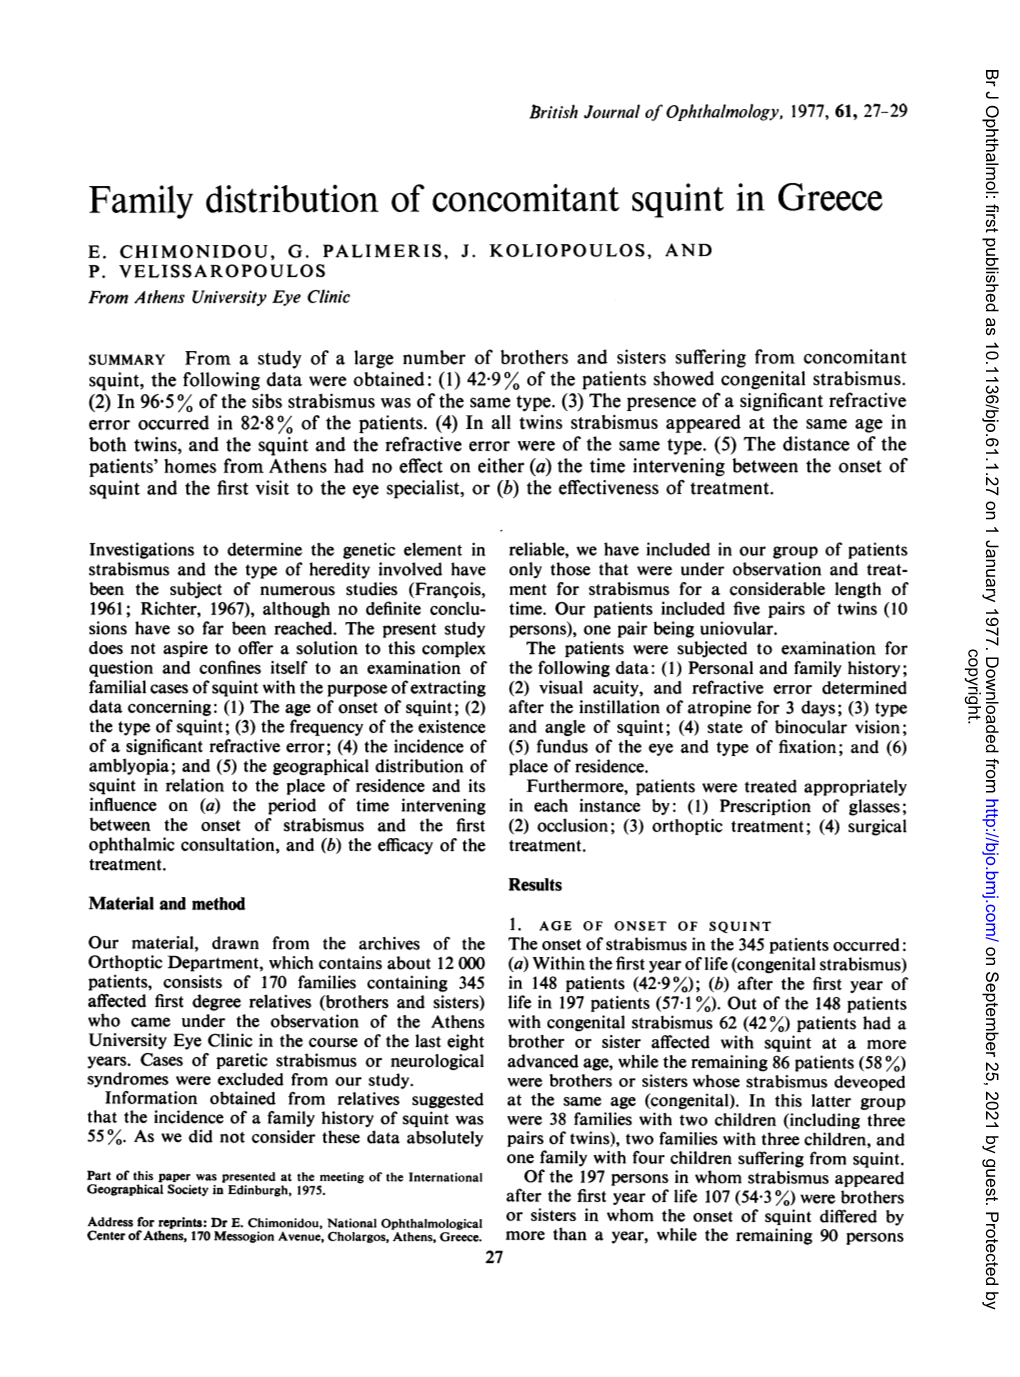 Family Distribution of Concomitant Squint in Greece E